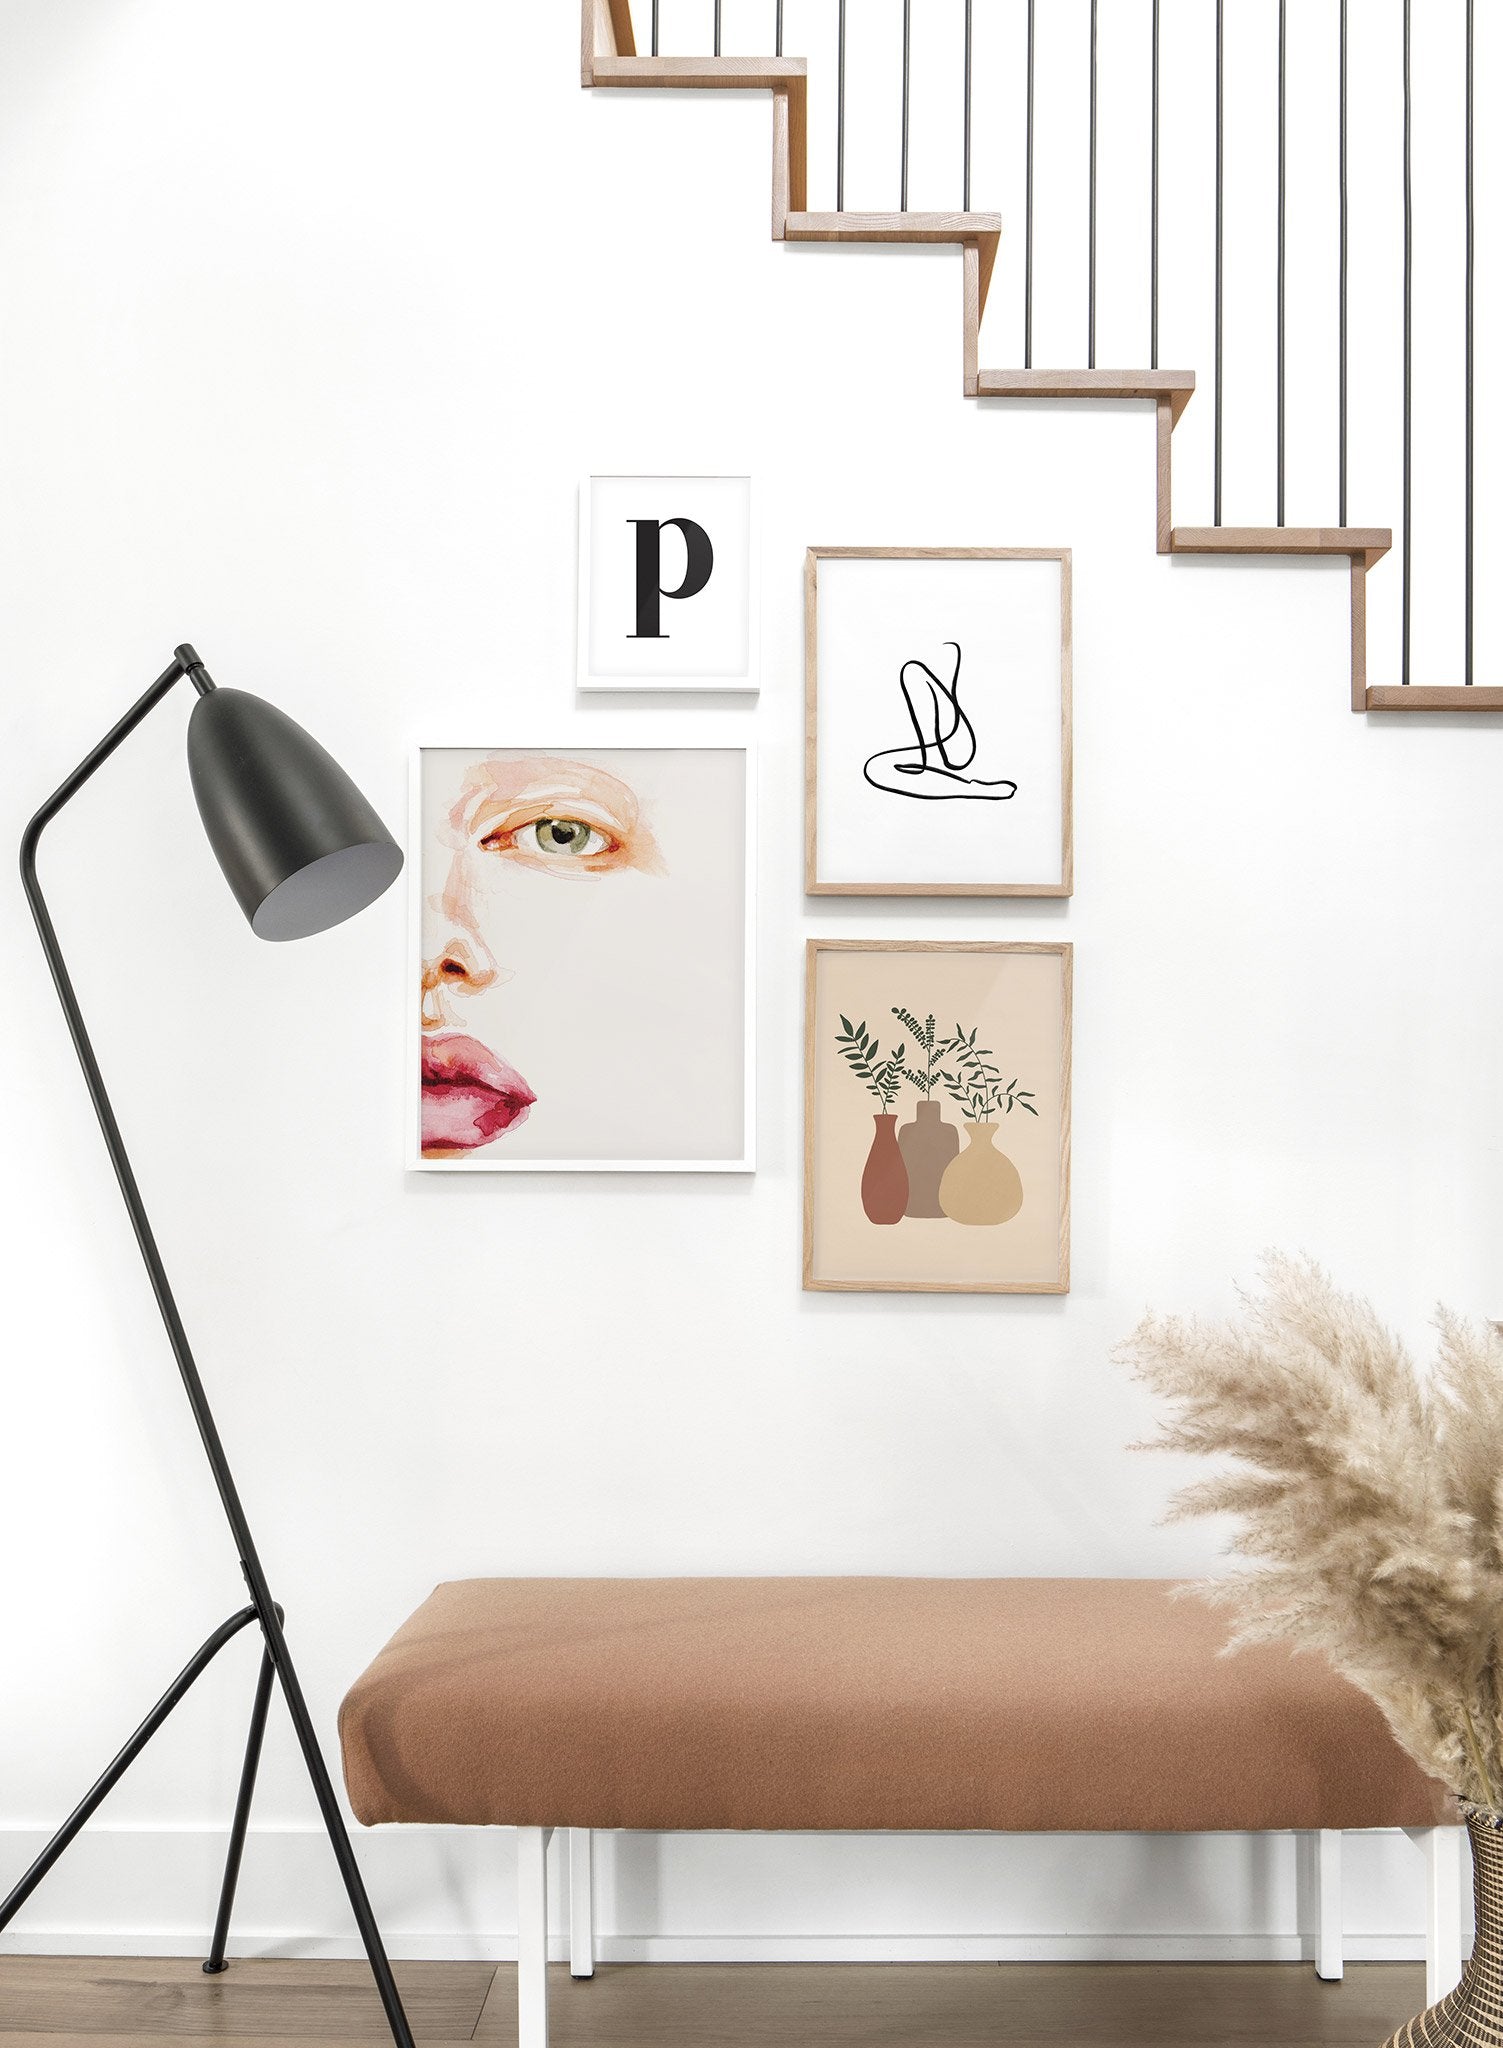 Fashion illustration poster by Opposite Wall with close up of face - Lifestyle Gallery - Entryway